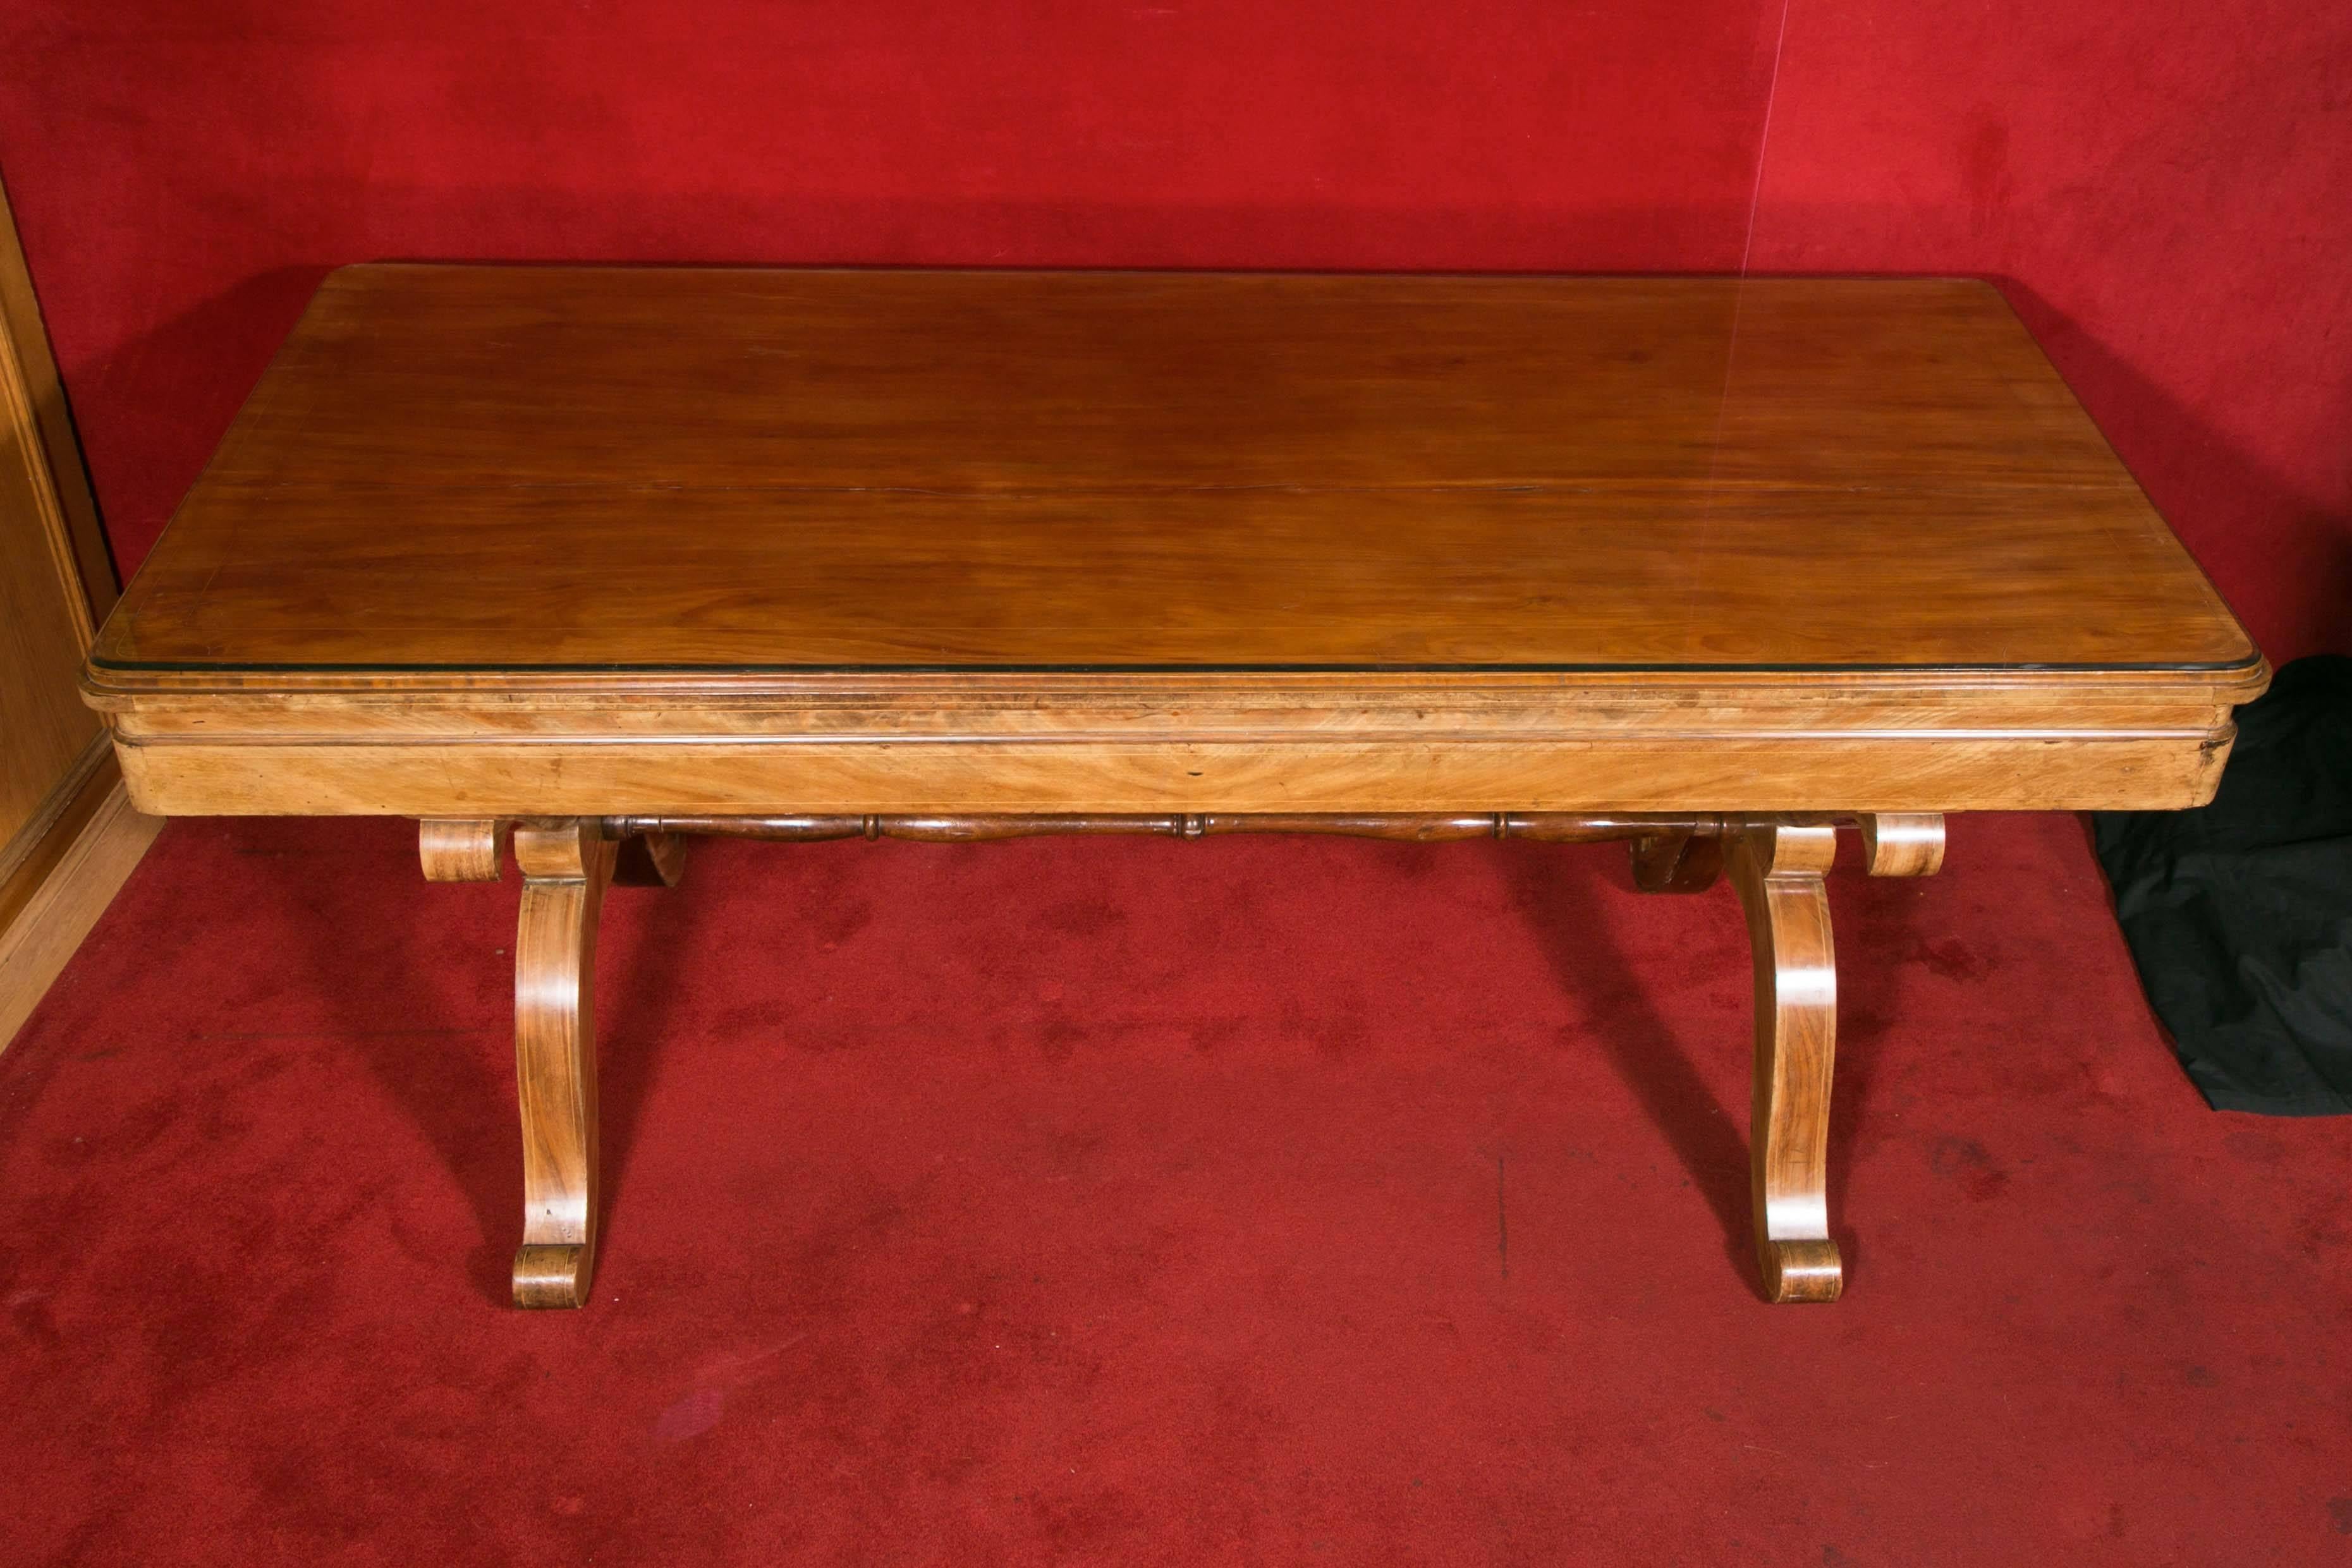 Charles X Desk or Table from the 19th Century